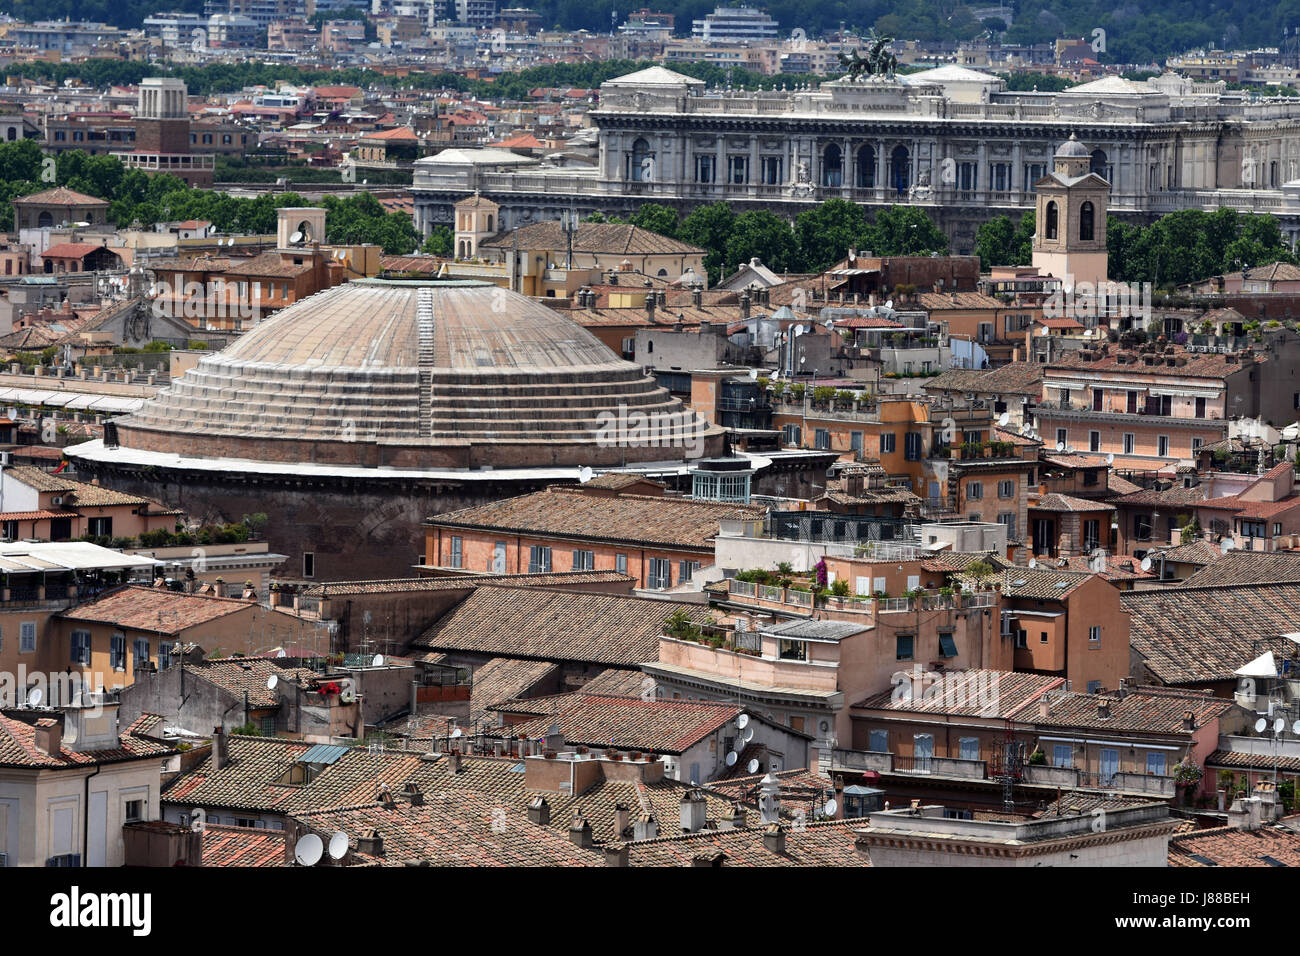 The beautiful Rome City scape with the Pantheon looking bold. Stock Photo